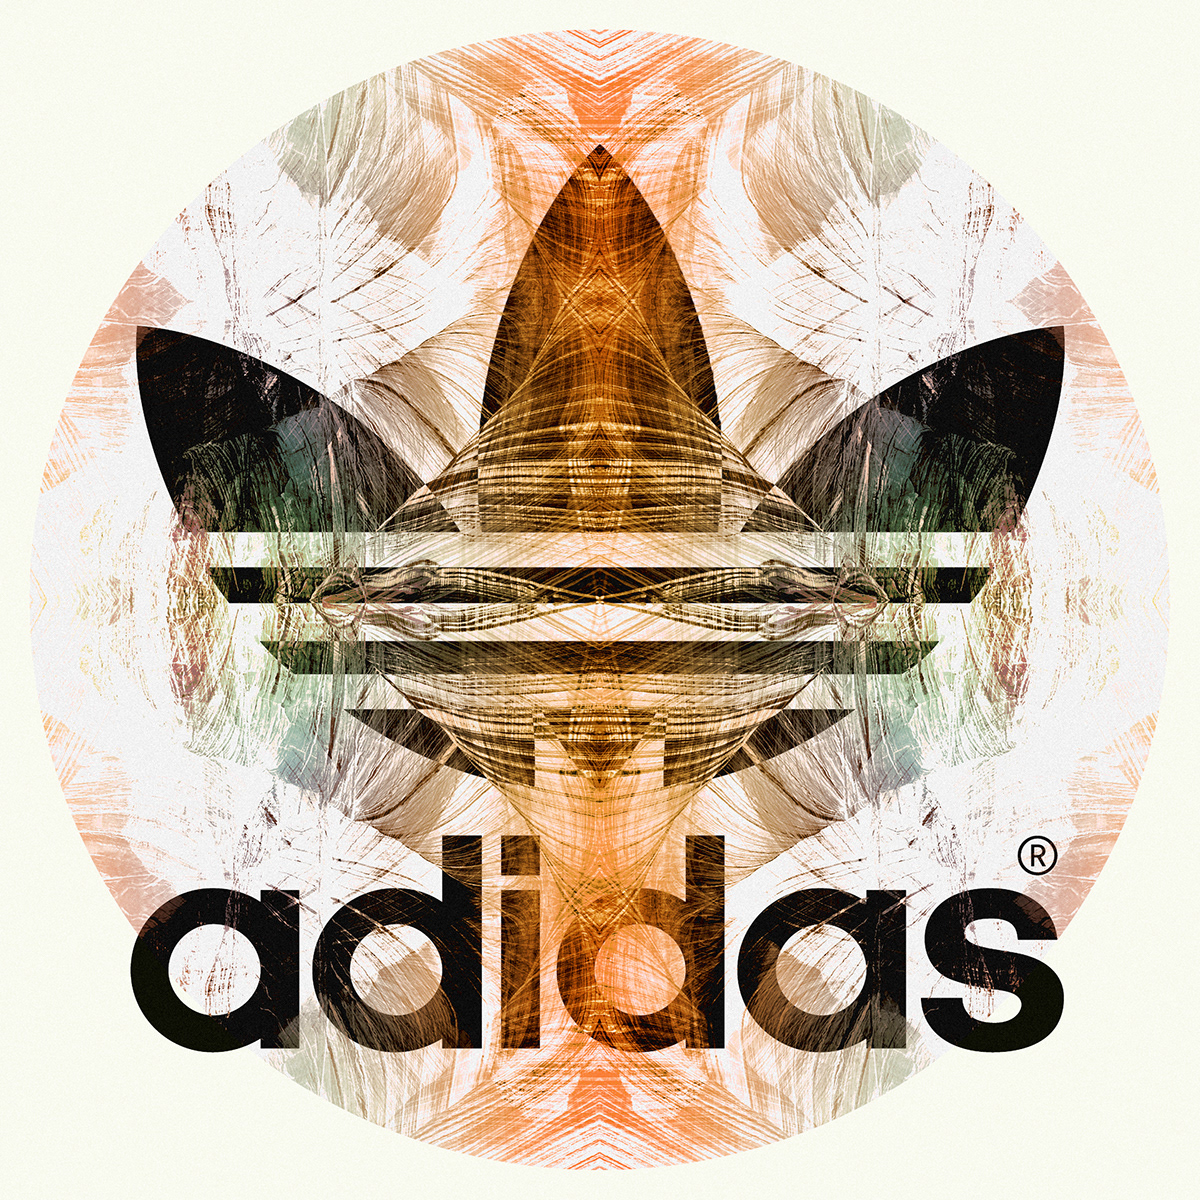 adidas sport advert psychedelic Refelctions geometric black and white brand concept